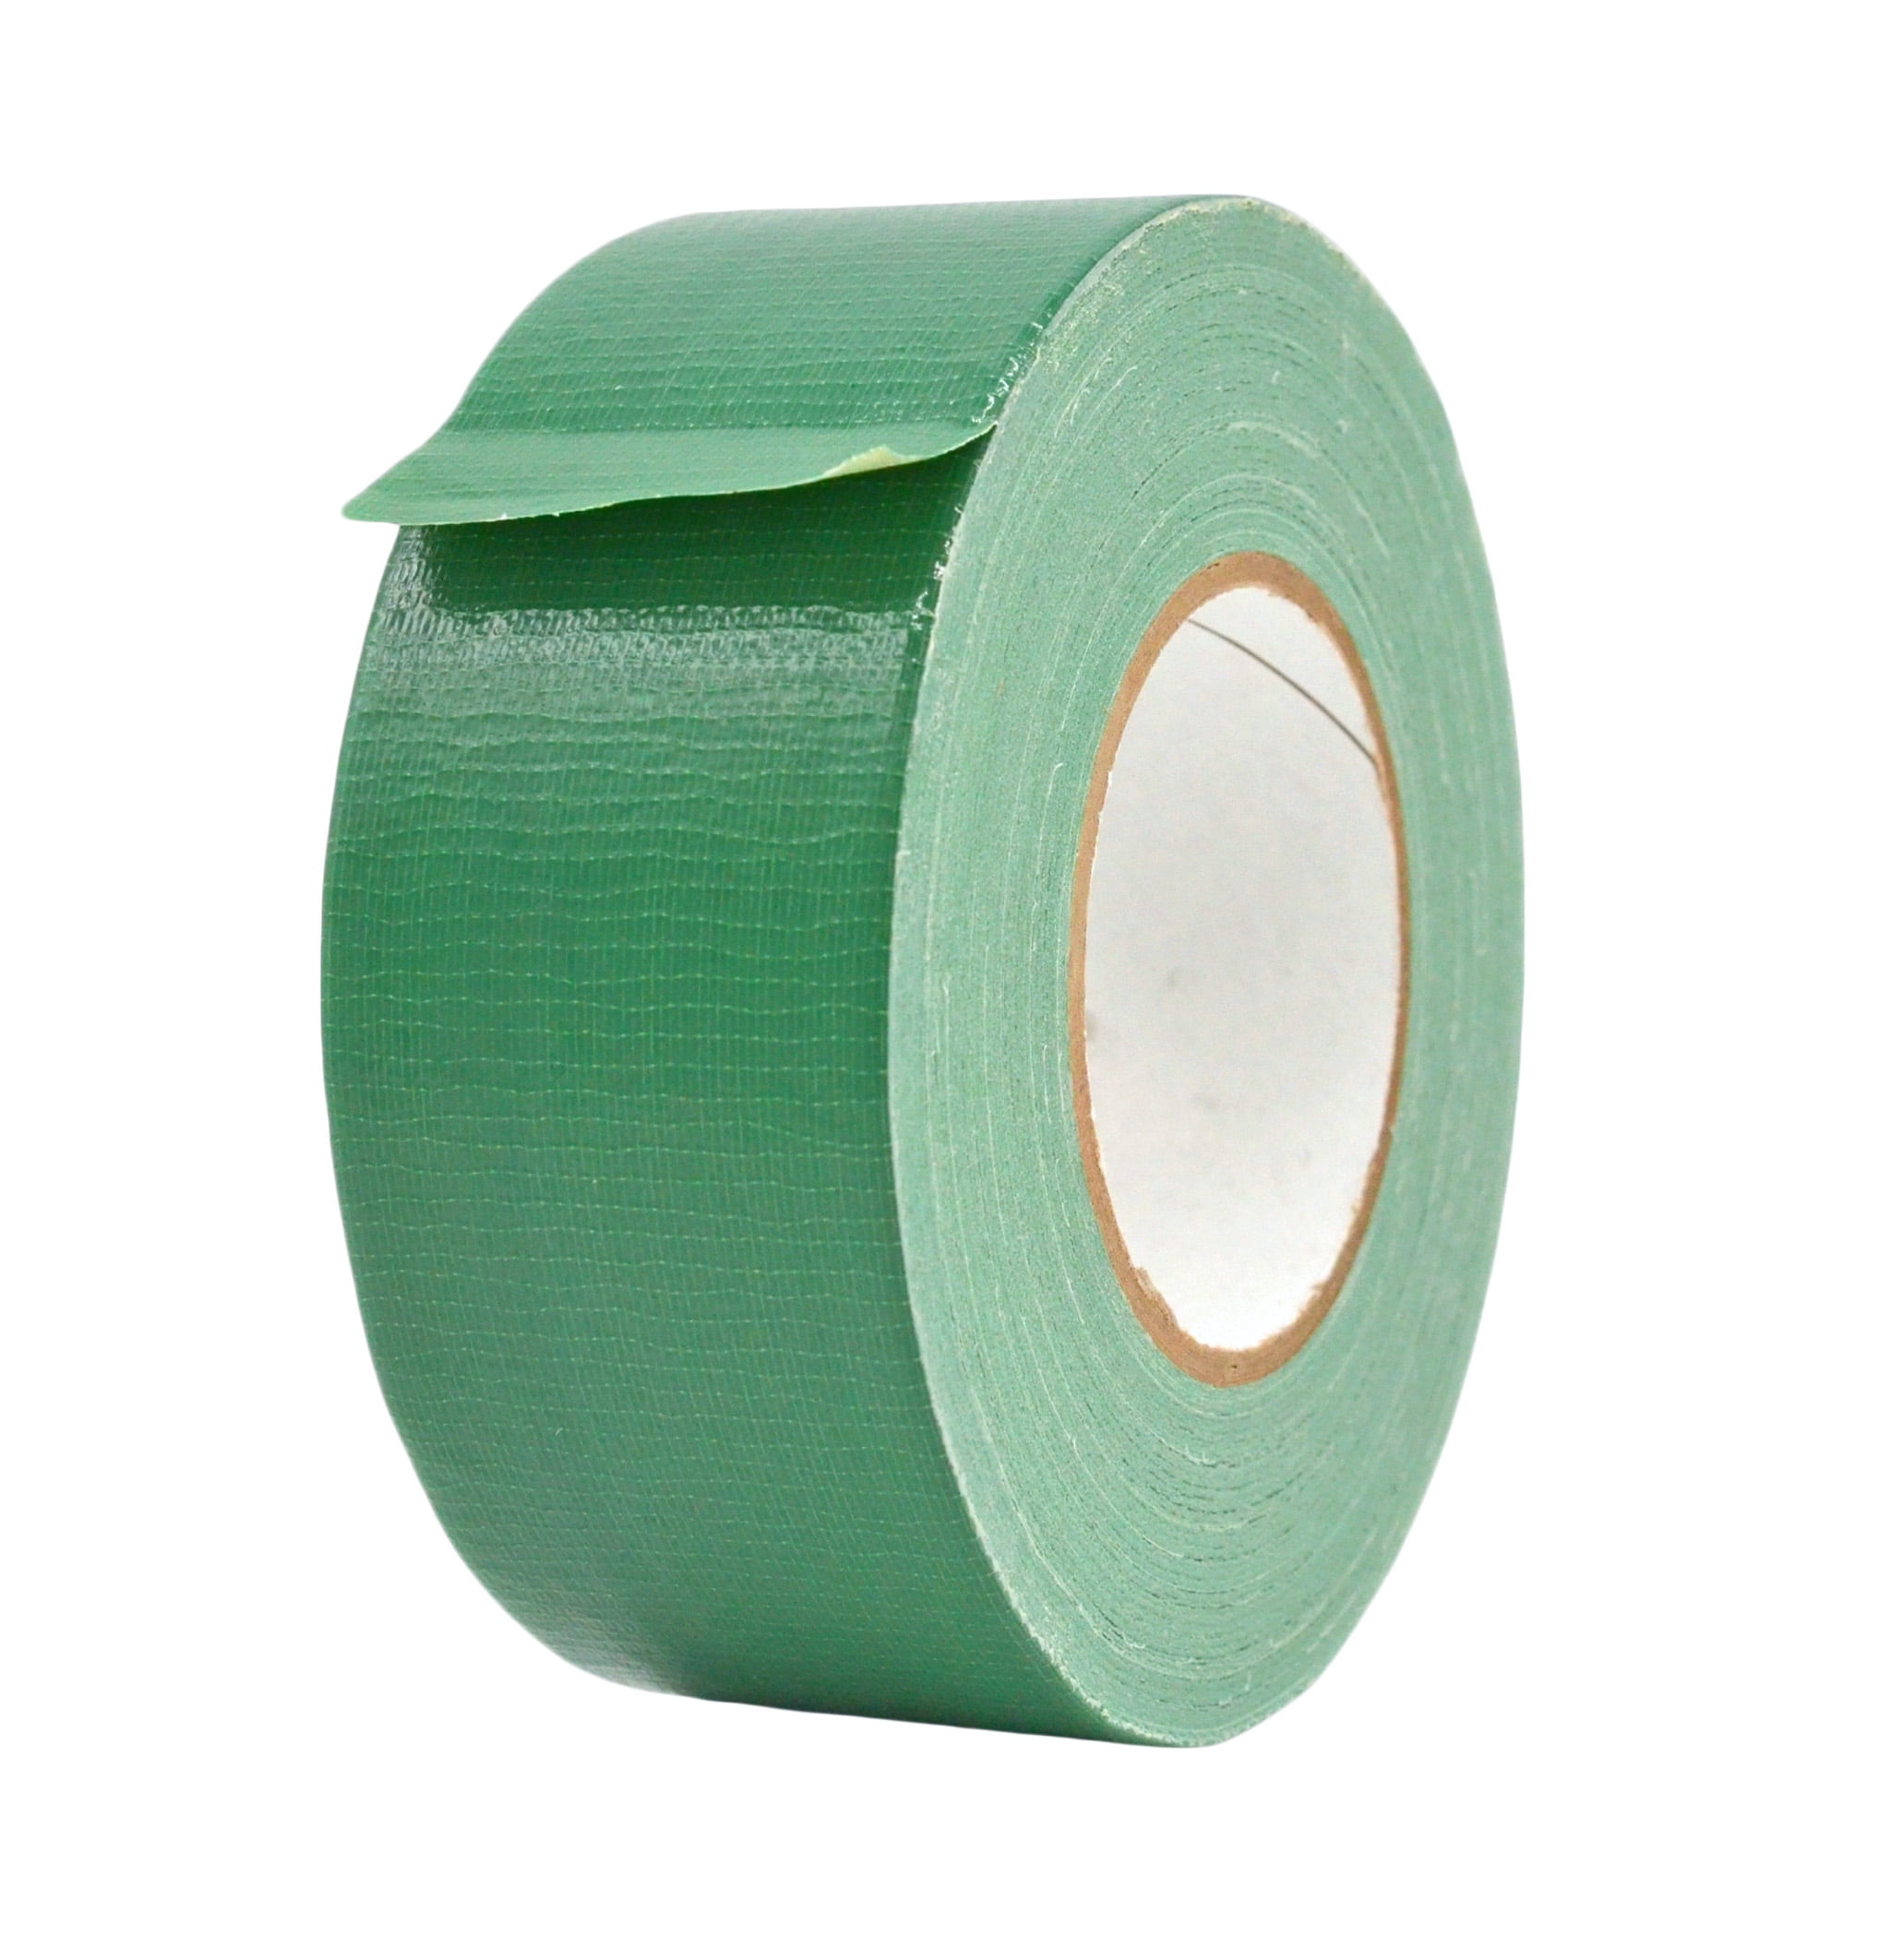 MAT Tape Dark Blue 2.36 in. x 60 yd. Colored Duct Tape, 1 Roll